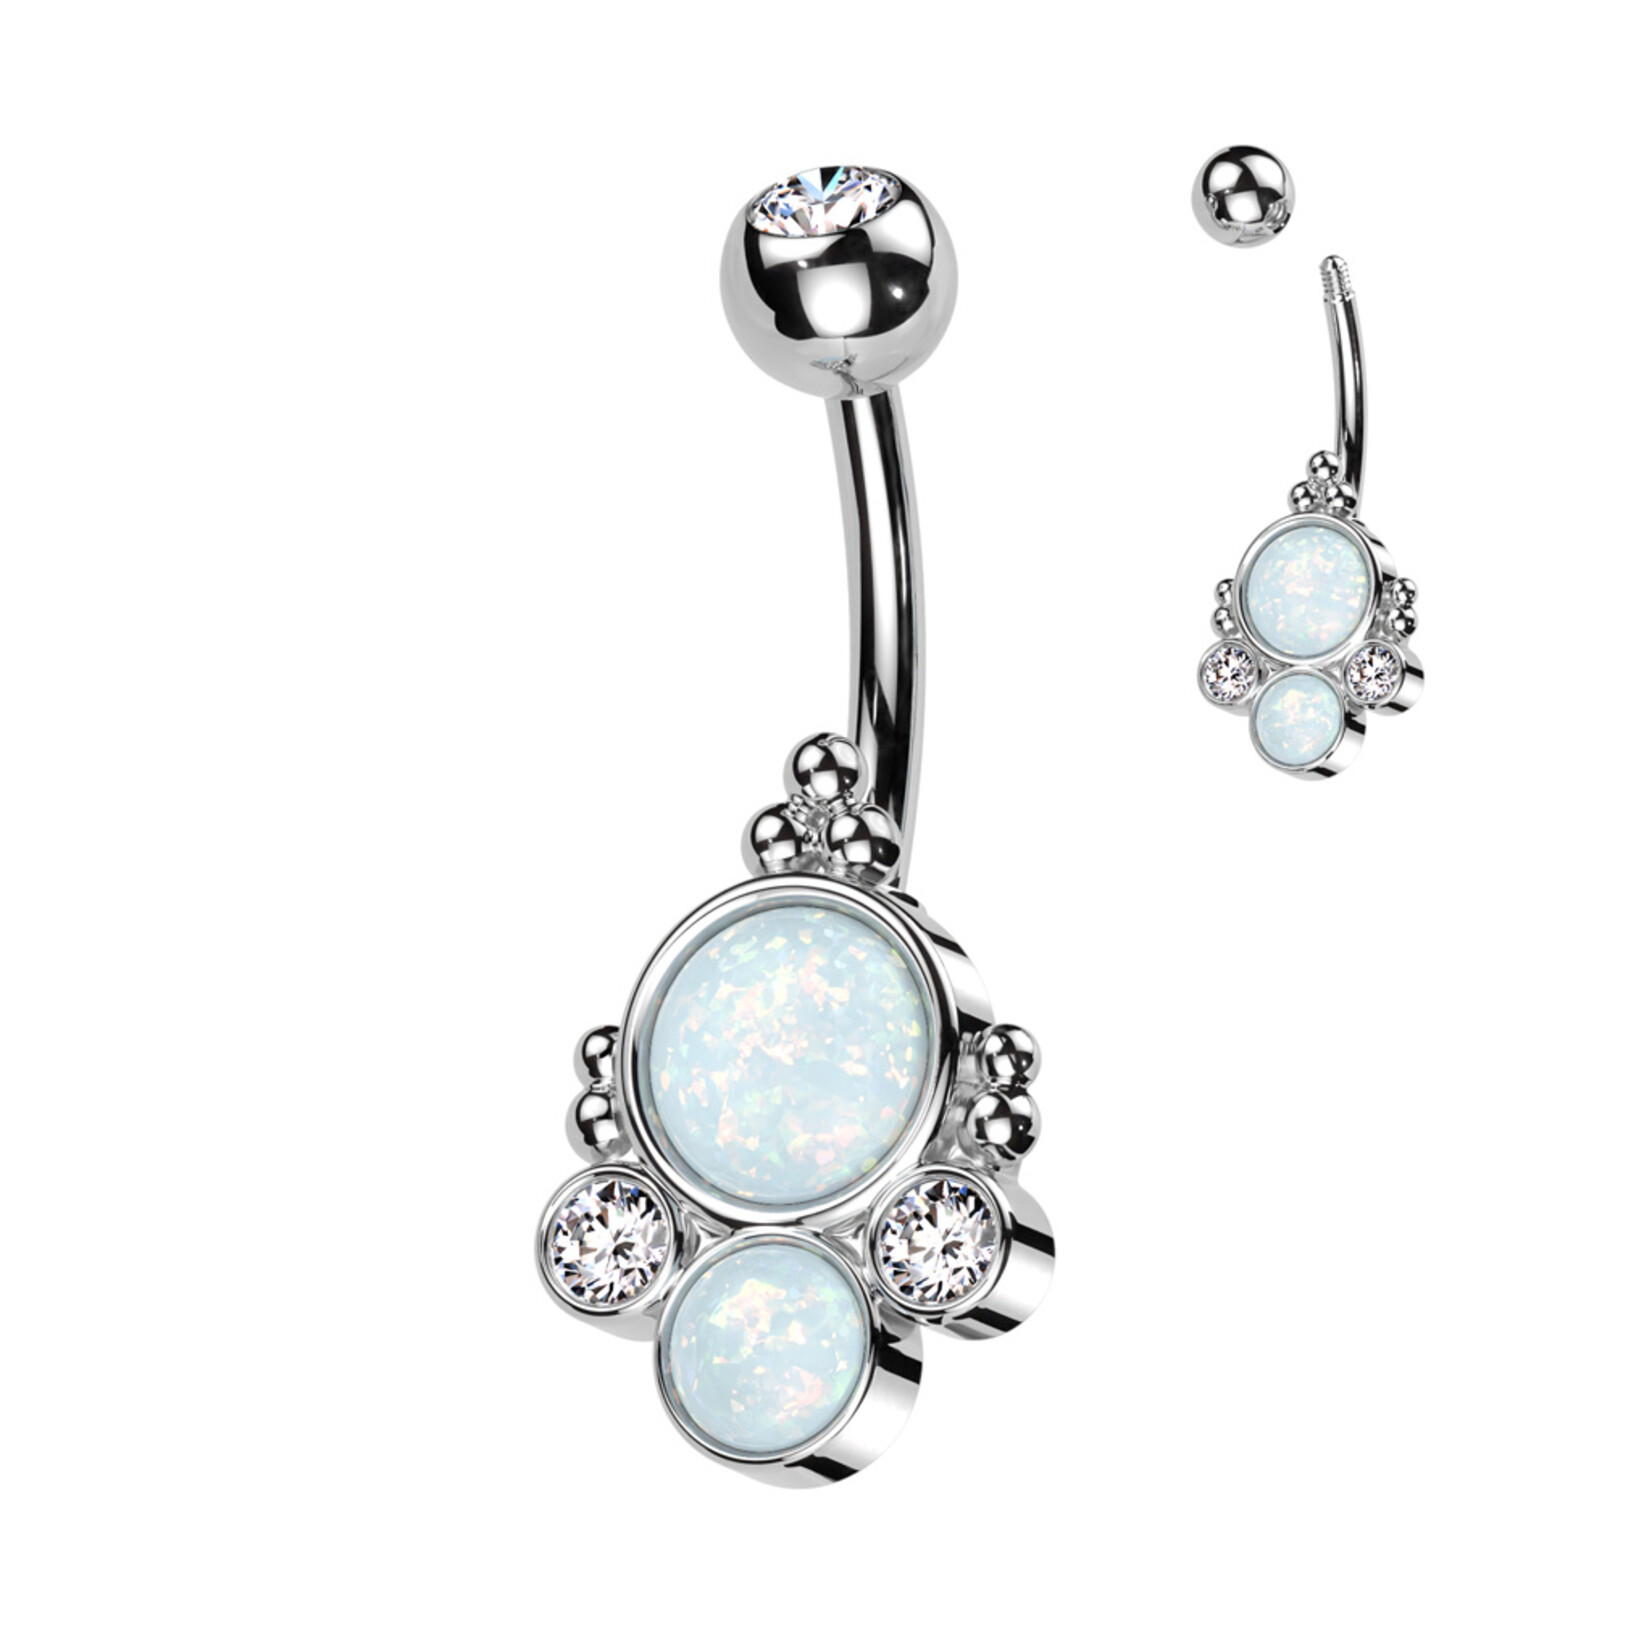 Hollywood Body Jewelry Opal & Crystal Navel Ring